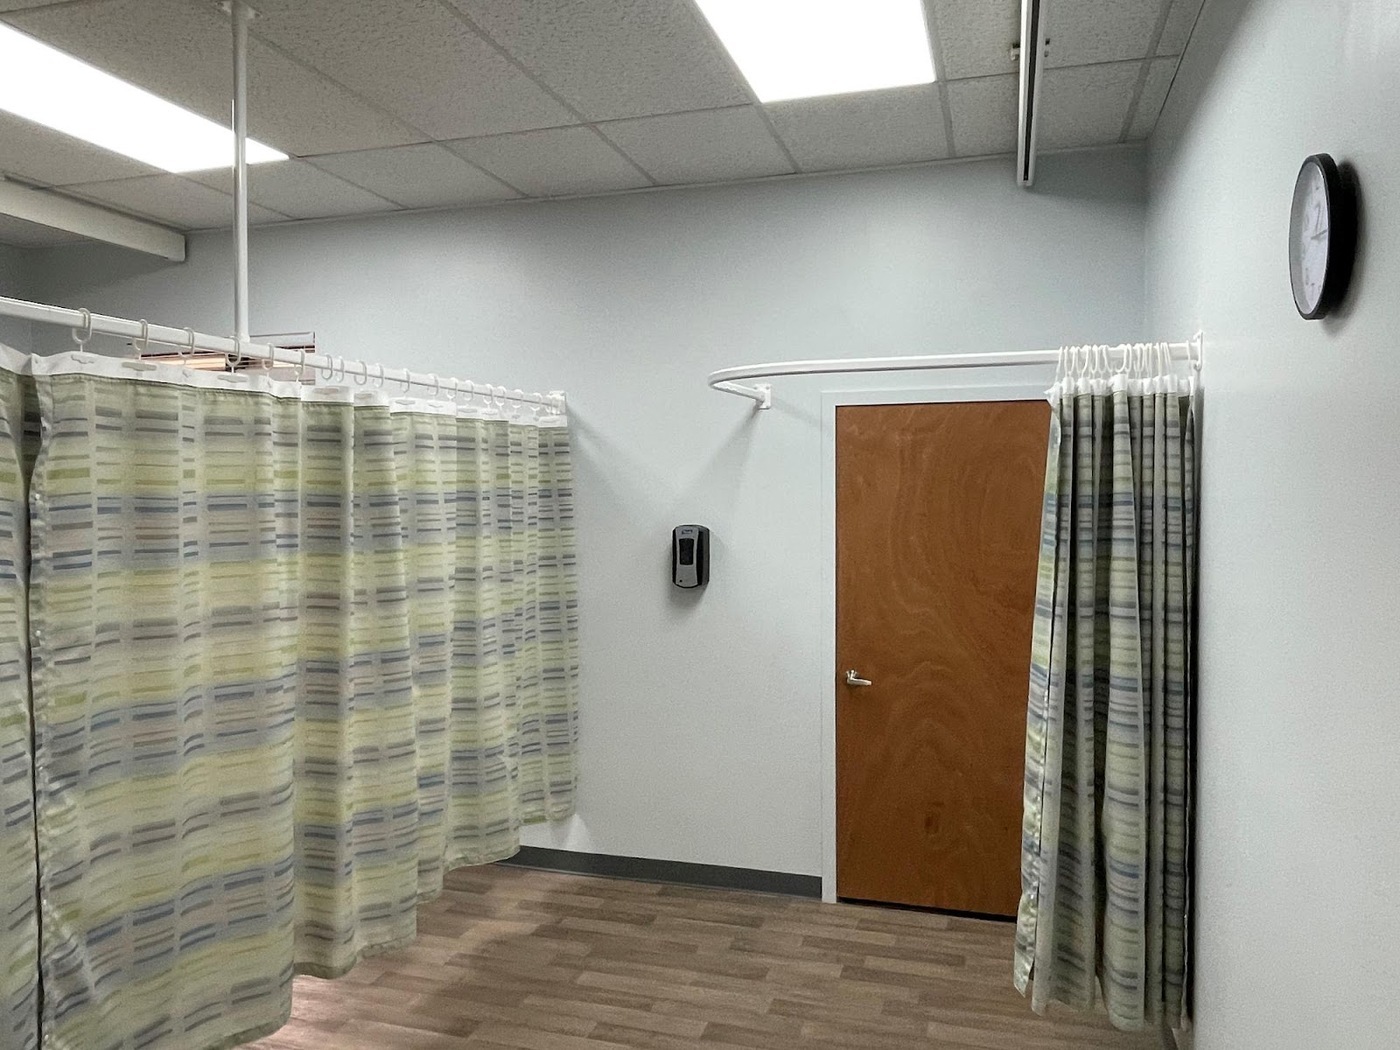 Lorton Group was established in 2010. The company specializes in the manufacturing and distribution of textile products like traditional hospital cubicle curtains, shower curtains, as well as patient-lift curtain systems, and non-ceiling mounted cubicle curtain systems